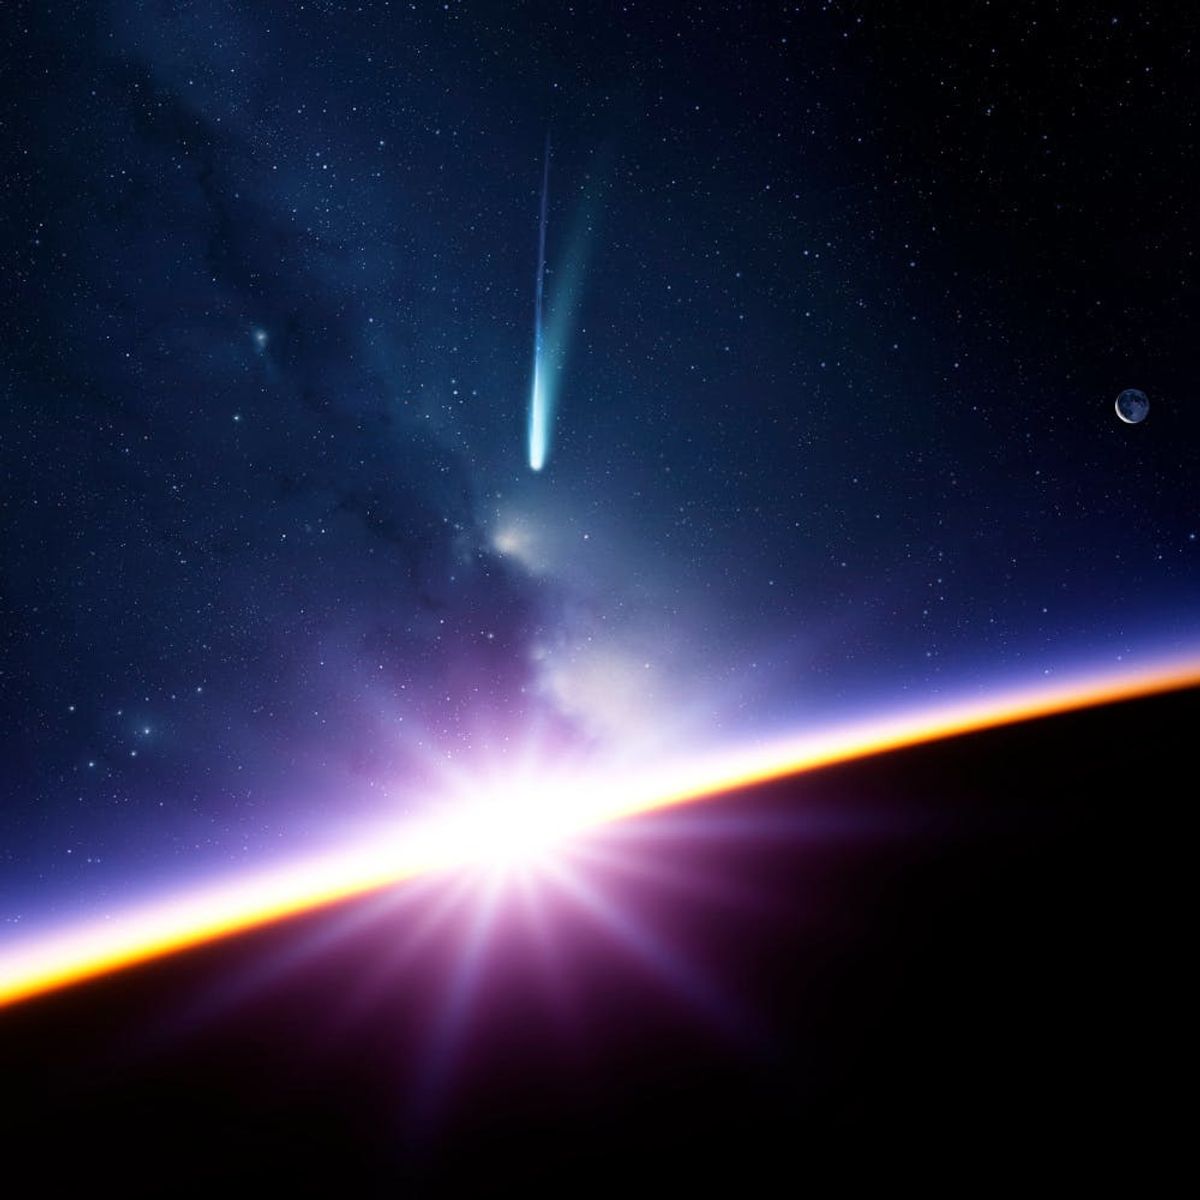 A Comet Will Be Flying Past Earth on New Year’s Eve